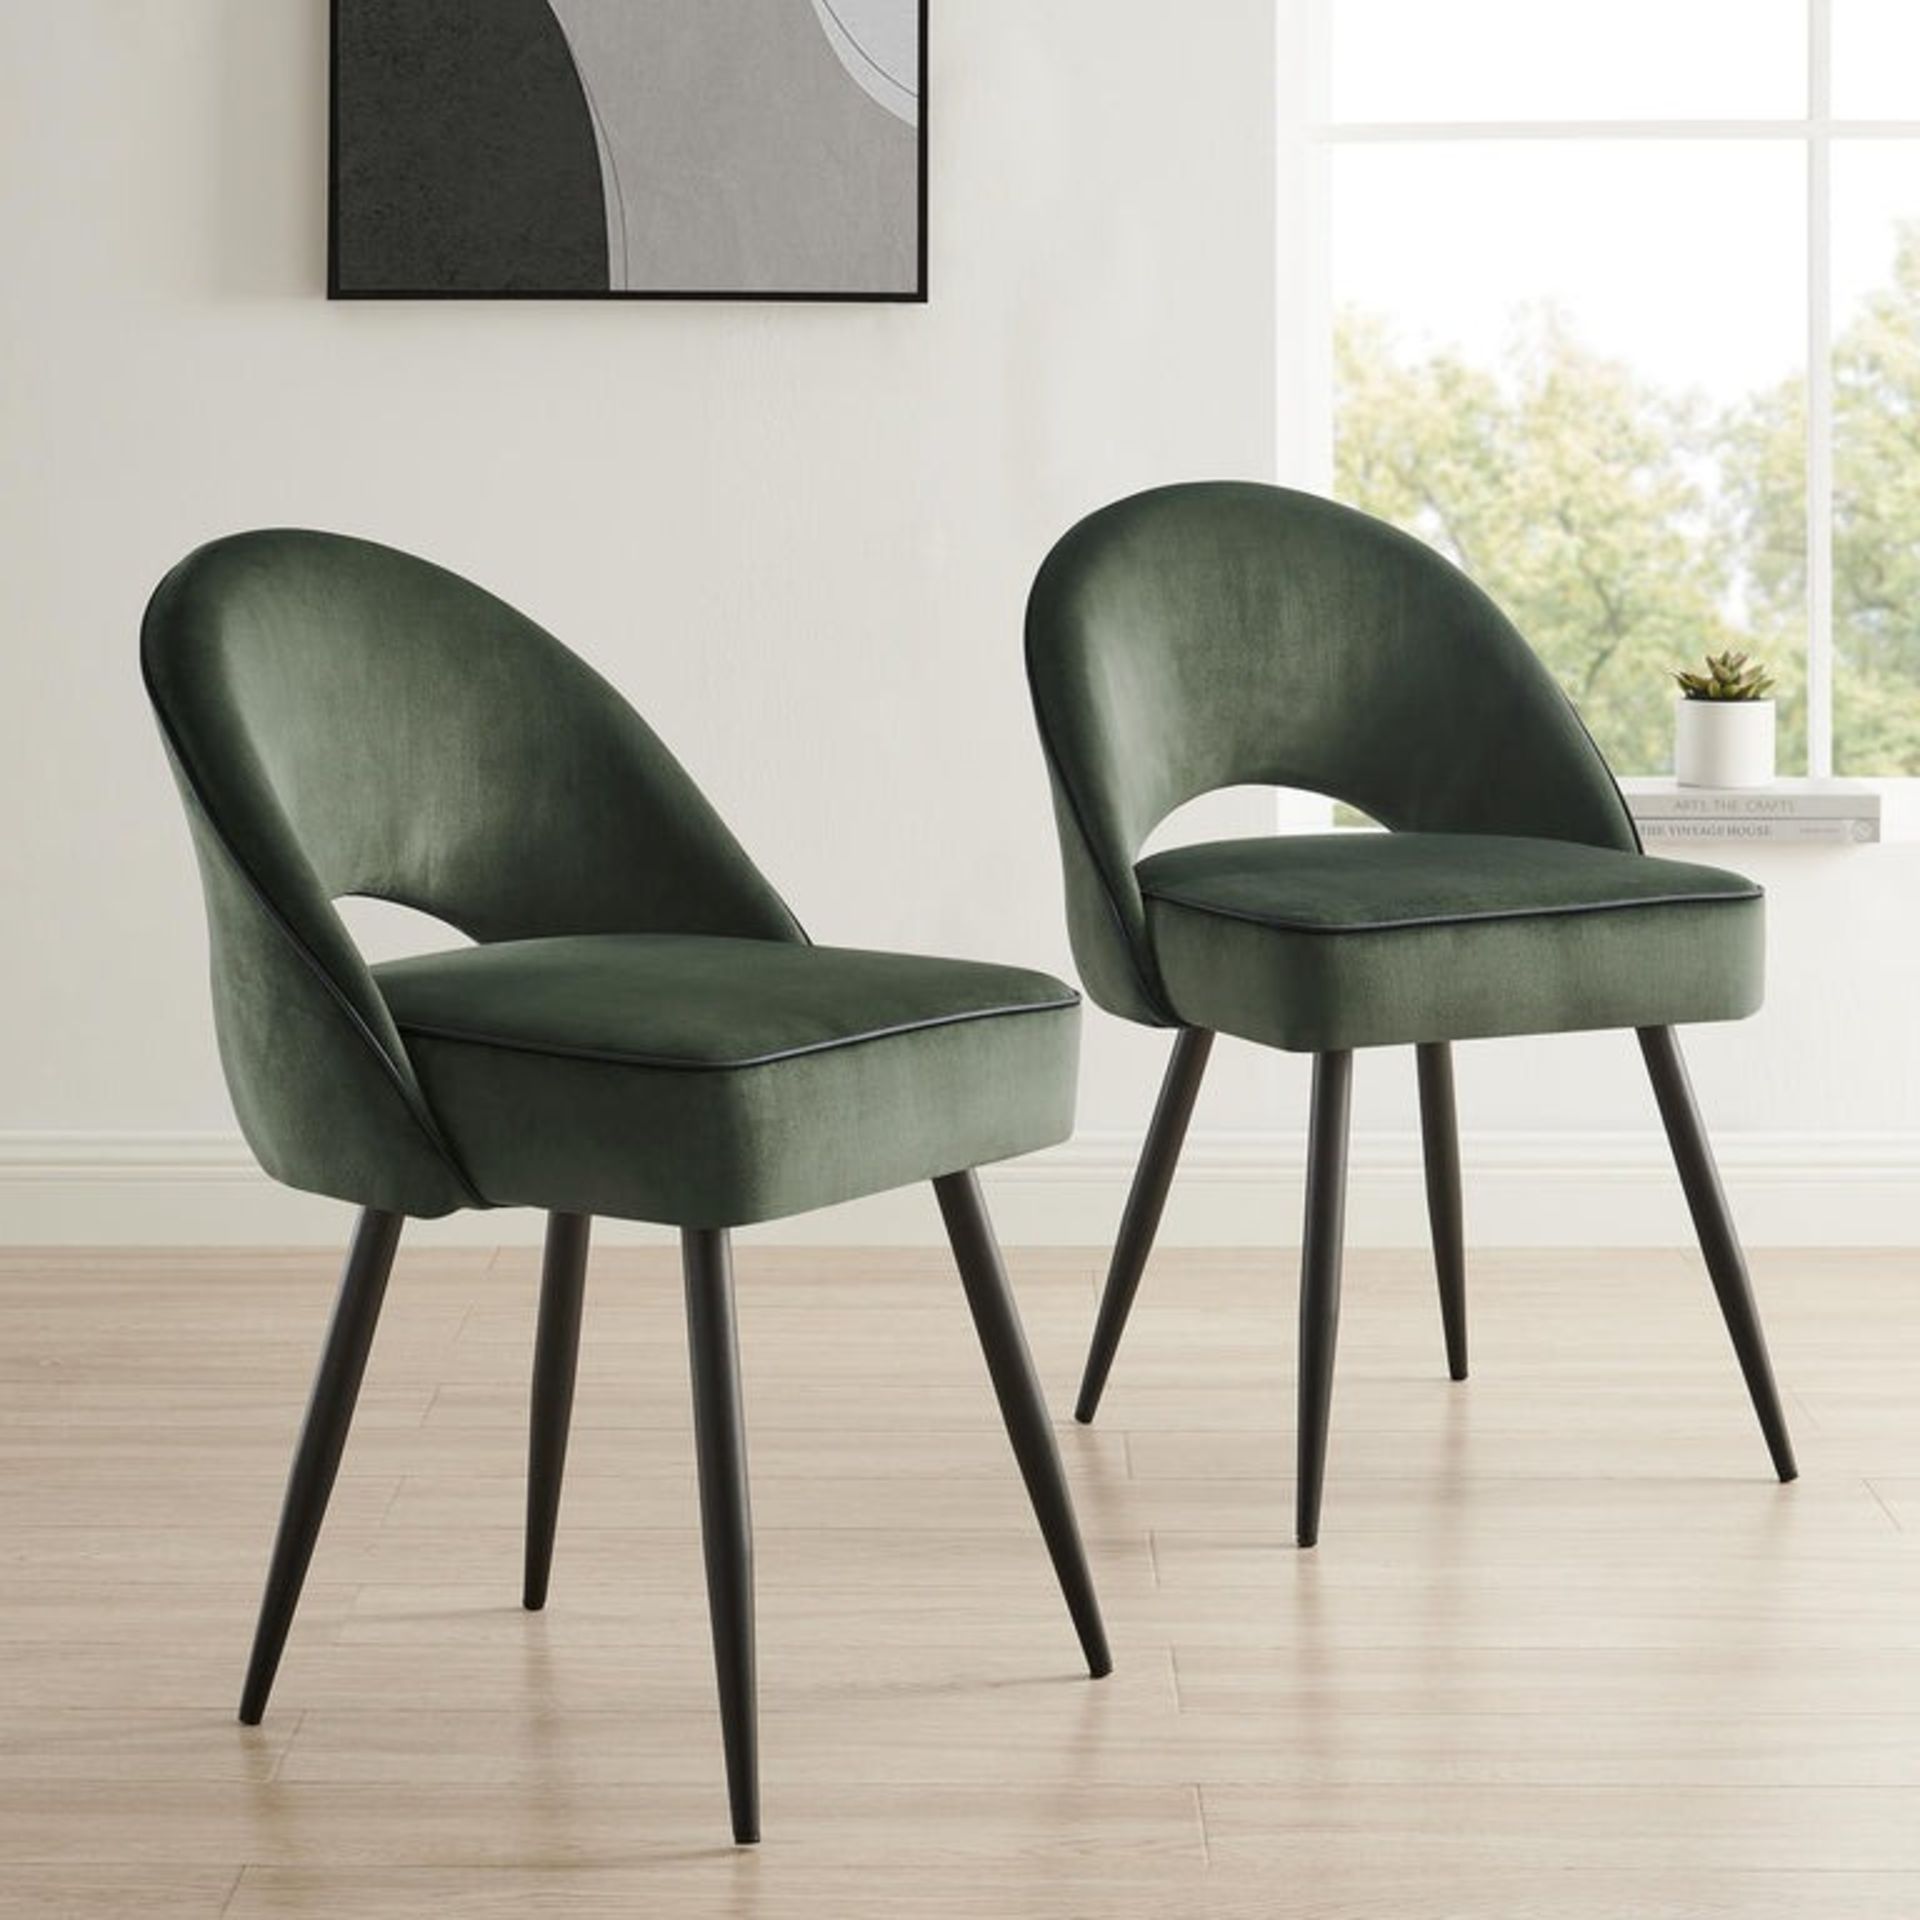 Oakley Set of 2 Dark Green Velvet Upholstered Dining Chairs with Contrast Piping (R30) RRP £209.99